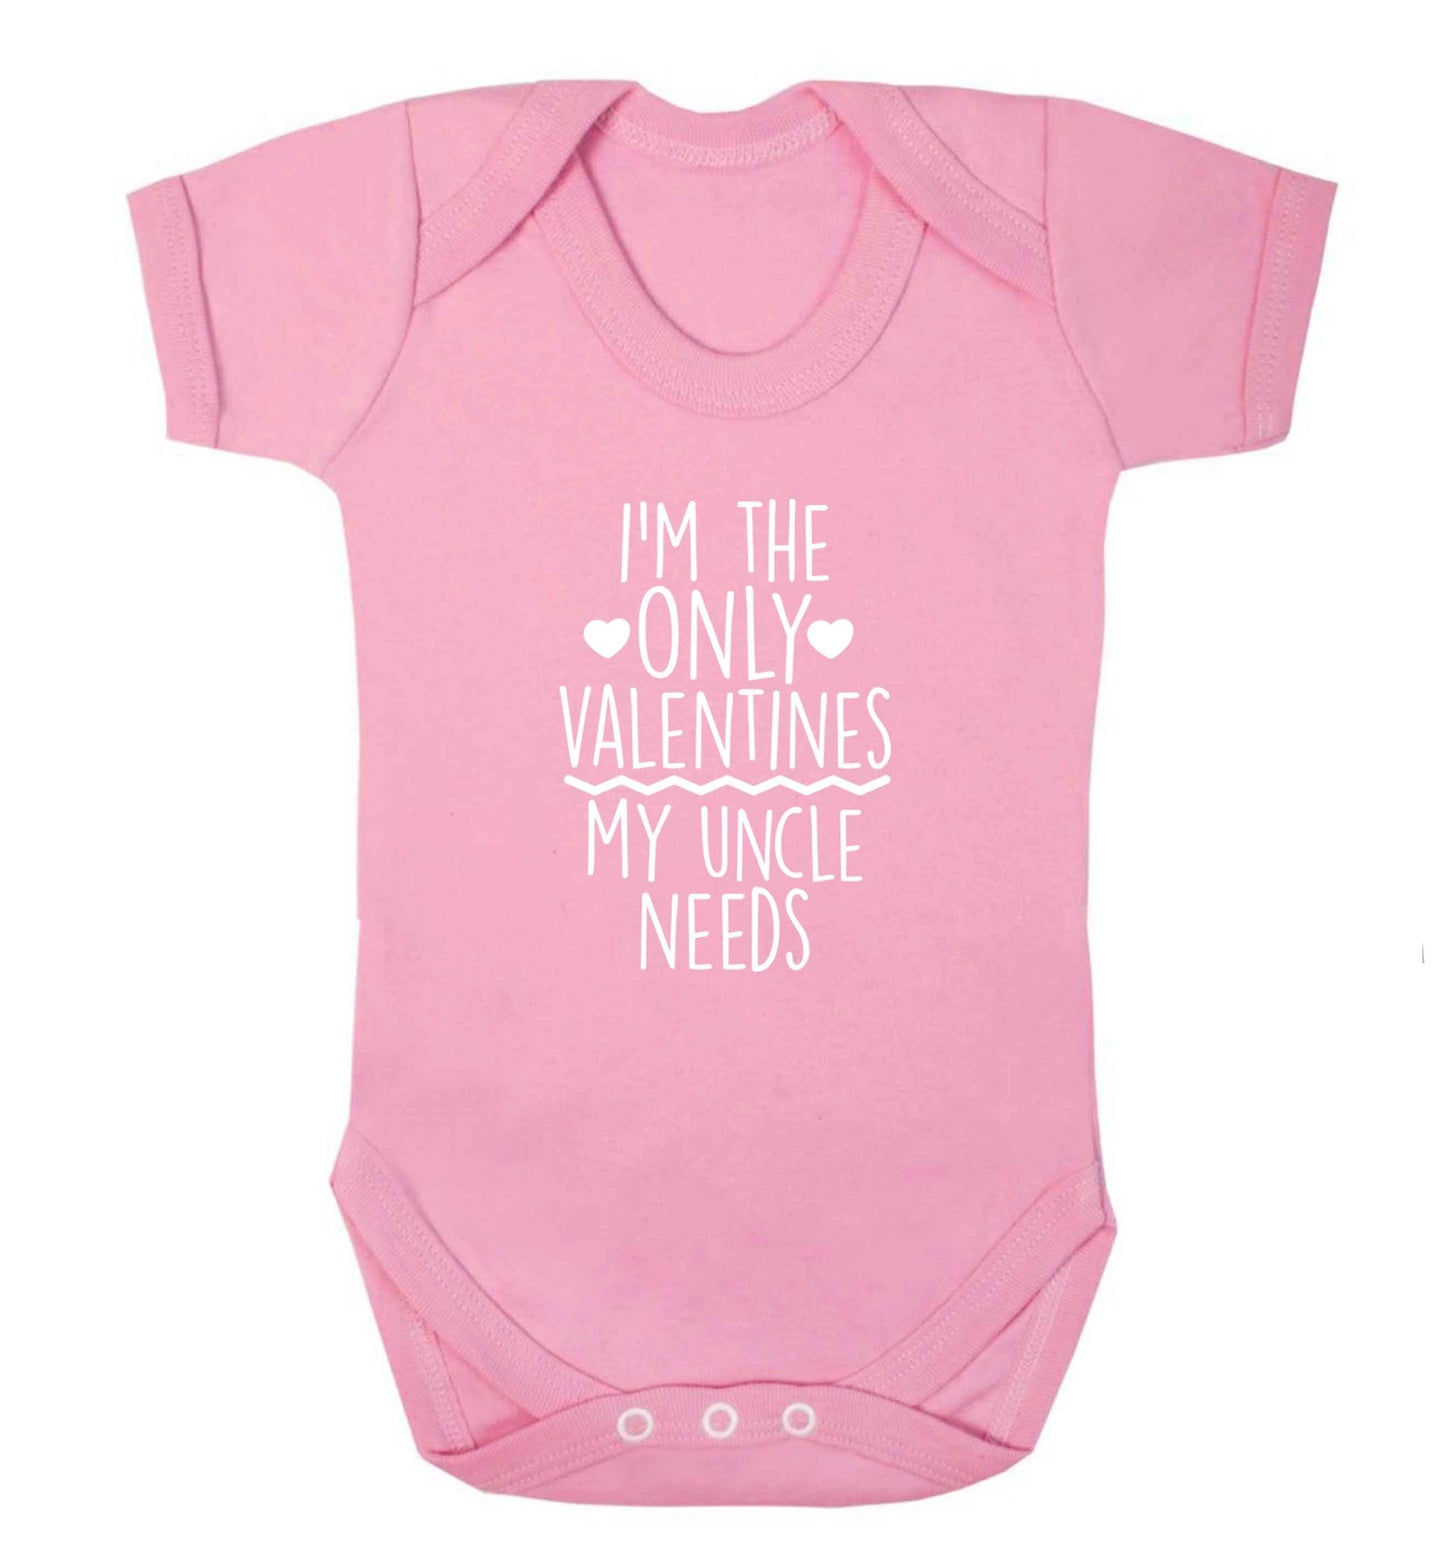 I'm the only valentines my uncle needs baby vest pale pink 18-24 months